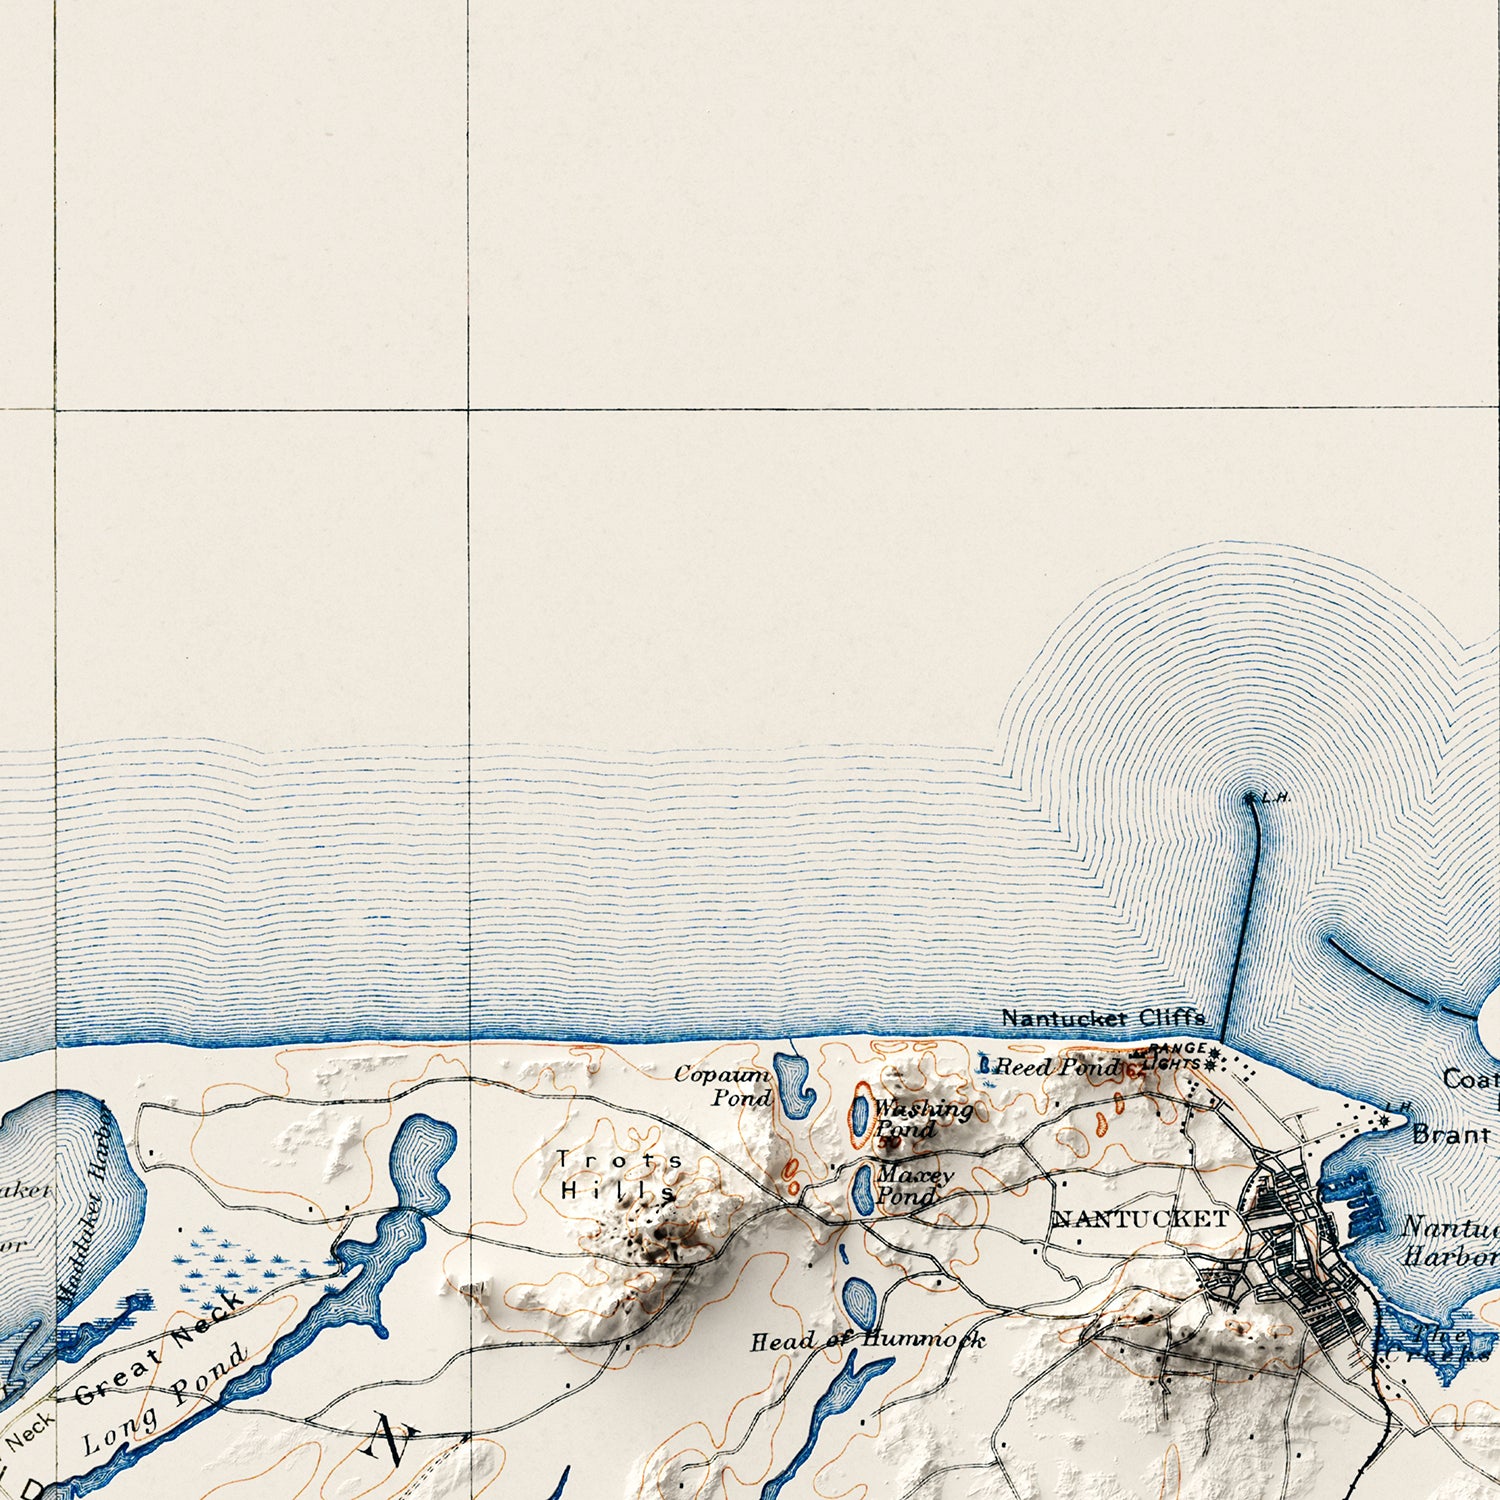 Nantucket, MA - Vintage Shaded Relief Map (1899)